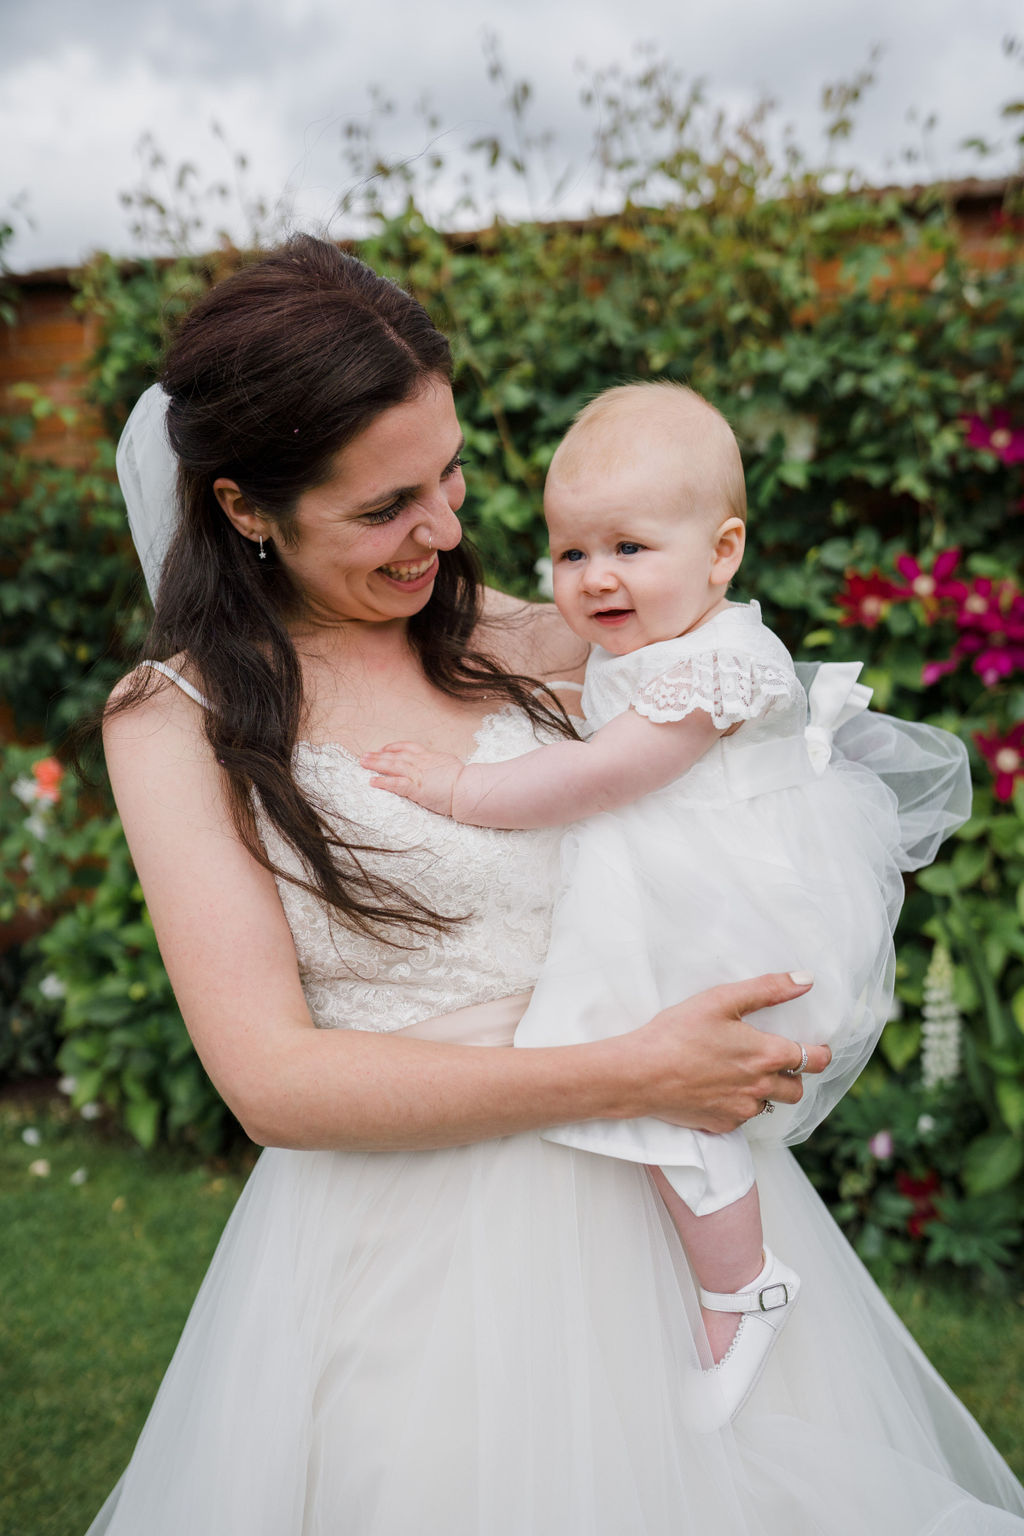 Upton Barn and Walled Gardens wedding, the bride Lauren with her daughter.